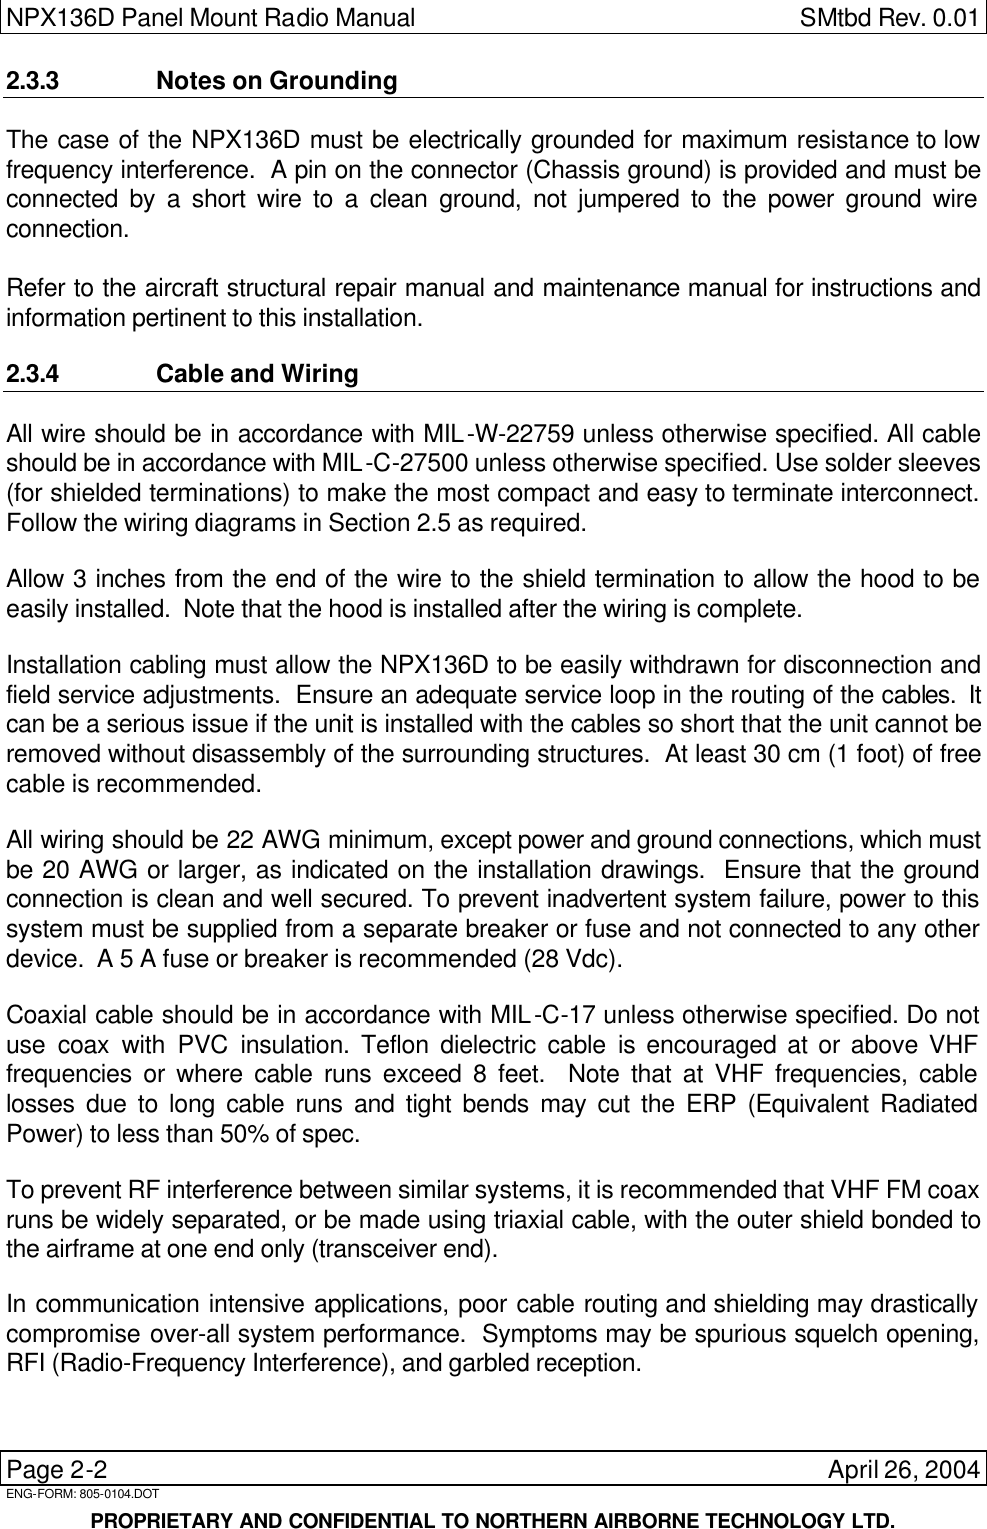 NPX136D Panel Mount Radio Manual  SMtbd Rev. 0.01  Page 2-2    April 26, 2004 ENG-FORM: 805-0104.DOT     PROPRIETARY AND CONFIDENTIAL TO NORTHERN AIRBORNE TECHNOLOGY LTD. 2.3.3 Notes on Grounding The case of the NPX136D must be electrically grounded for maximum resistance to low frequency interference.  A pin on the connector (Chassis ground) is provided and must be connected by a short wire to a clean ground, not jumpered to the power ground wire connection.  Refer to the aircraft structural repair manual and maintenance manual for instructions and information pertinent to this installation.  2.3.4 Cable and Wiring All wire should be in accordance with MIL-W-22759 unless otherwise specified. All cable should be in accordance with MIL-C-27500 unless otherwise specified. Use solder sleeves (for shielded terminations) to make the most compact and easy to terminate interconnect.  Follow the wiring diagrams in Section 2.5 as required.  Allow 3 inches from the end of the wire to the shield termination to allow the hood to be easily installed.  Note that the hood is installed after the wiring is complete.  Installation cabling must allow the NPX136D to be easily withdrawn for disconnection and field service adjustments.  Ensure an adequate service loop in the routing of the cables.  It can be a serious issue if the unit is installed with the cables so short that the unit cannot be removed without disassembly of the surrounding structures.  At least 30 cm (1 foot) of free cable is recommended.  All wiring should be 22 AWG minimum, except power and ground connections, which must be 20 AWG or larger, as indicated on the installation drawings.  Ensure that the ground connection is clean and well secured. To prevent inadvertent system failure, power to this system must be supplied from a separate breaker or fuse and not connected to any other device.  A 5 A fuse or breaker is recommended (28 Vdc).  Coaxial cable should be in accordance with MIL-C-17 unless otherwise specified. Do not use coax with PVC insulation. Teflon dielectric cable is encouraged at or above VHF frequencies or where cable runs exceed 8 feet.  Note that at VHF frequencies, cable losses due to long cable runs and tight bends may cut the ERP (Equivalent Radiated Power) to less than 50% of spec.  To prevent RF interference between similar systems, it is recommended that VHF FM coax runs be widely separated, or be made using triaxial cable, with the outer shield bonded to the airframe at one end only (transceiver end).    In communication intensive applications, poor cable routing and shielding may drastically compromise over-all system performance.  Symptoms may be spurious squelch opening, RFI (Radio-Frequency Interference), and garbled reception.  